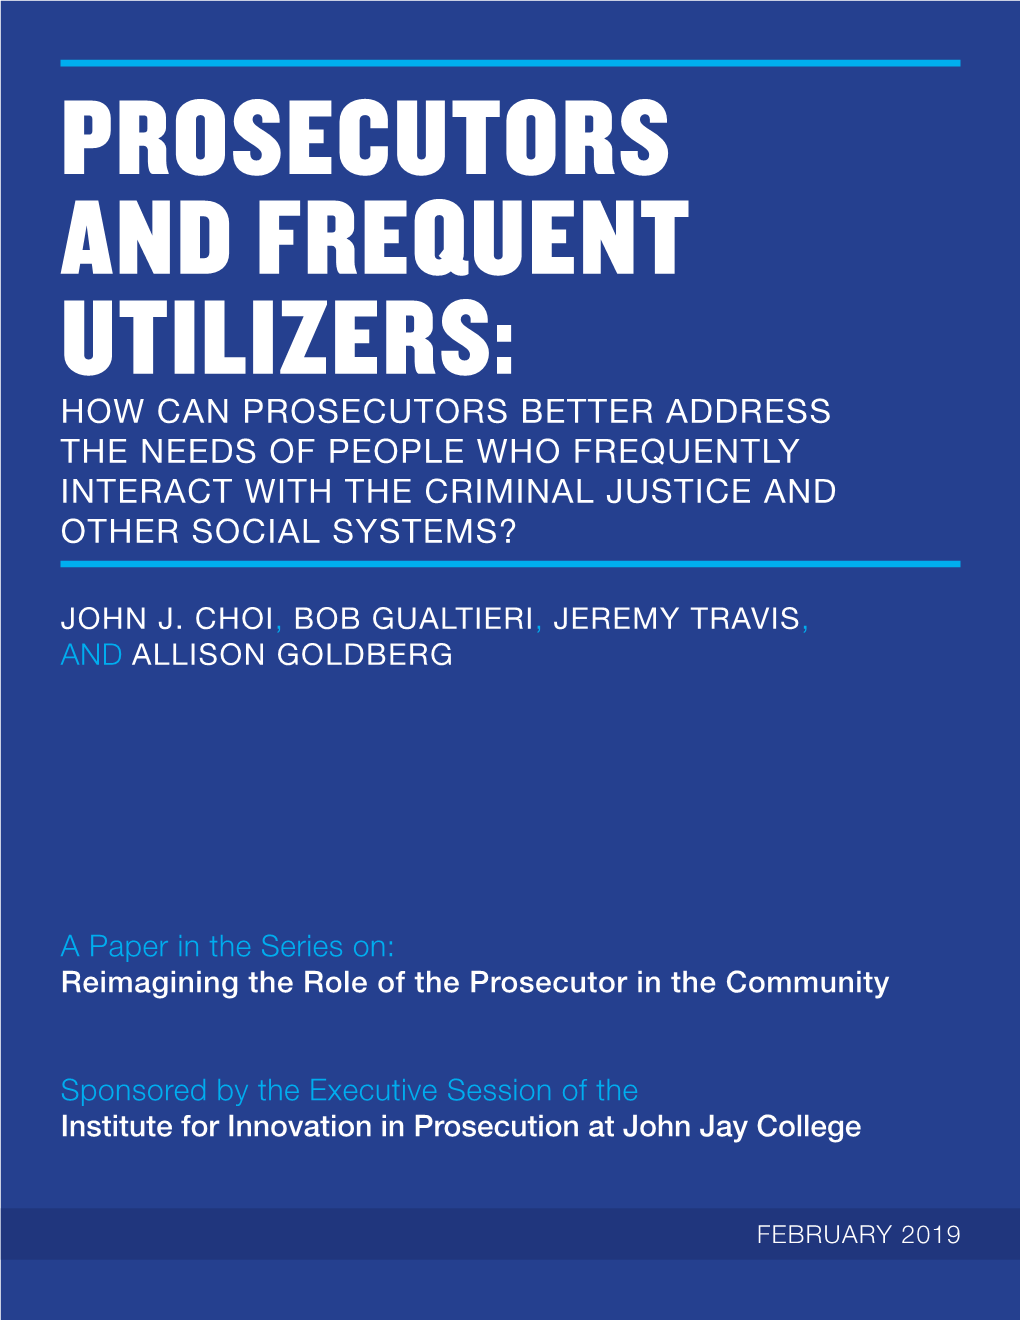 Prosecutors and Frequent Utilizers: How Can Prosecutors Better Address the Needs of People Who Frequently Interact with the Criminal Justice and Other Social Systems?